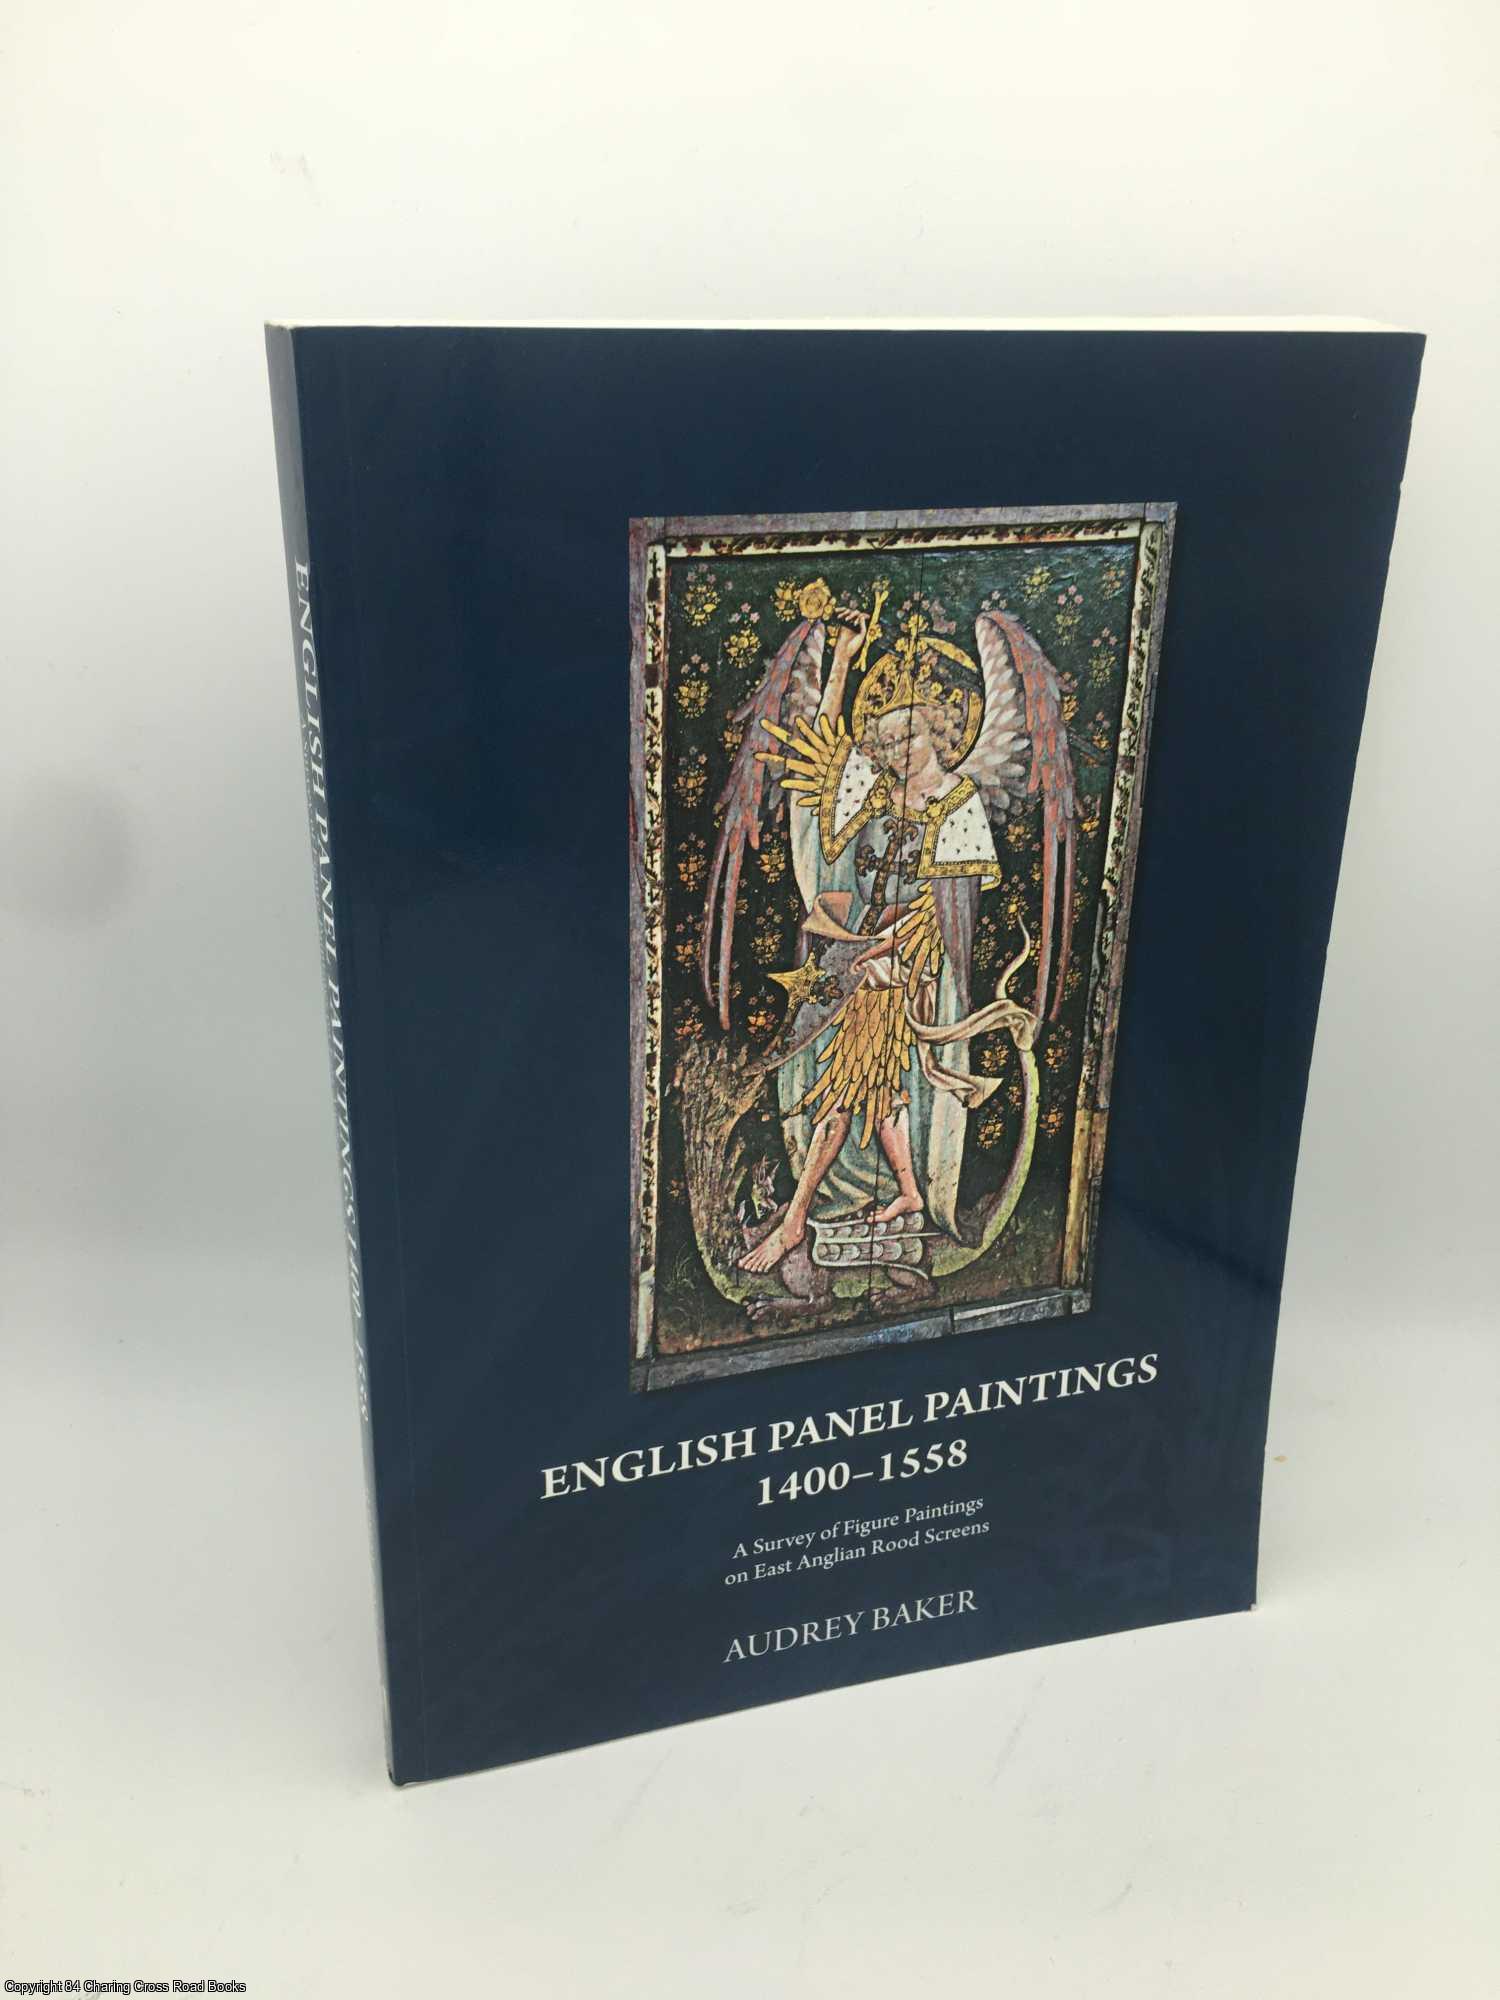 Baker, Audrey M. - English Panel Paintings 1400-1558: A Survey of Figure Paintings on East Anglian Rood-screens